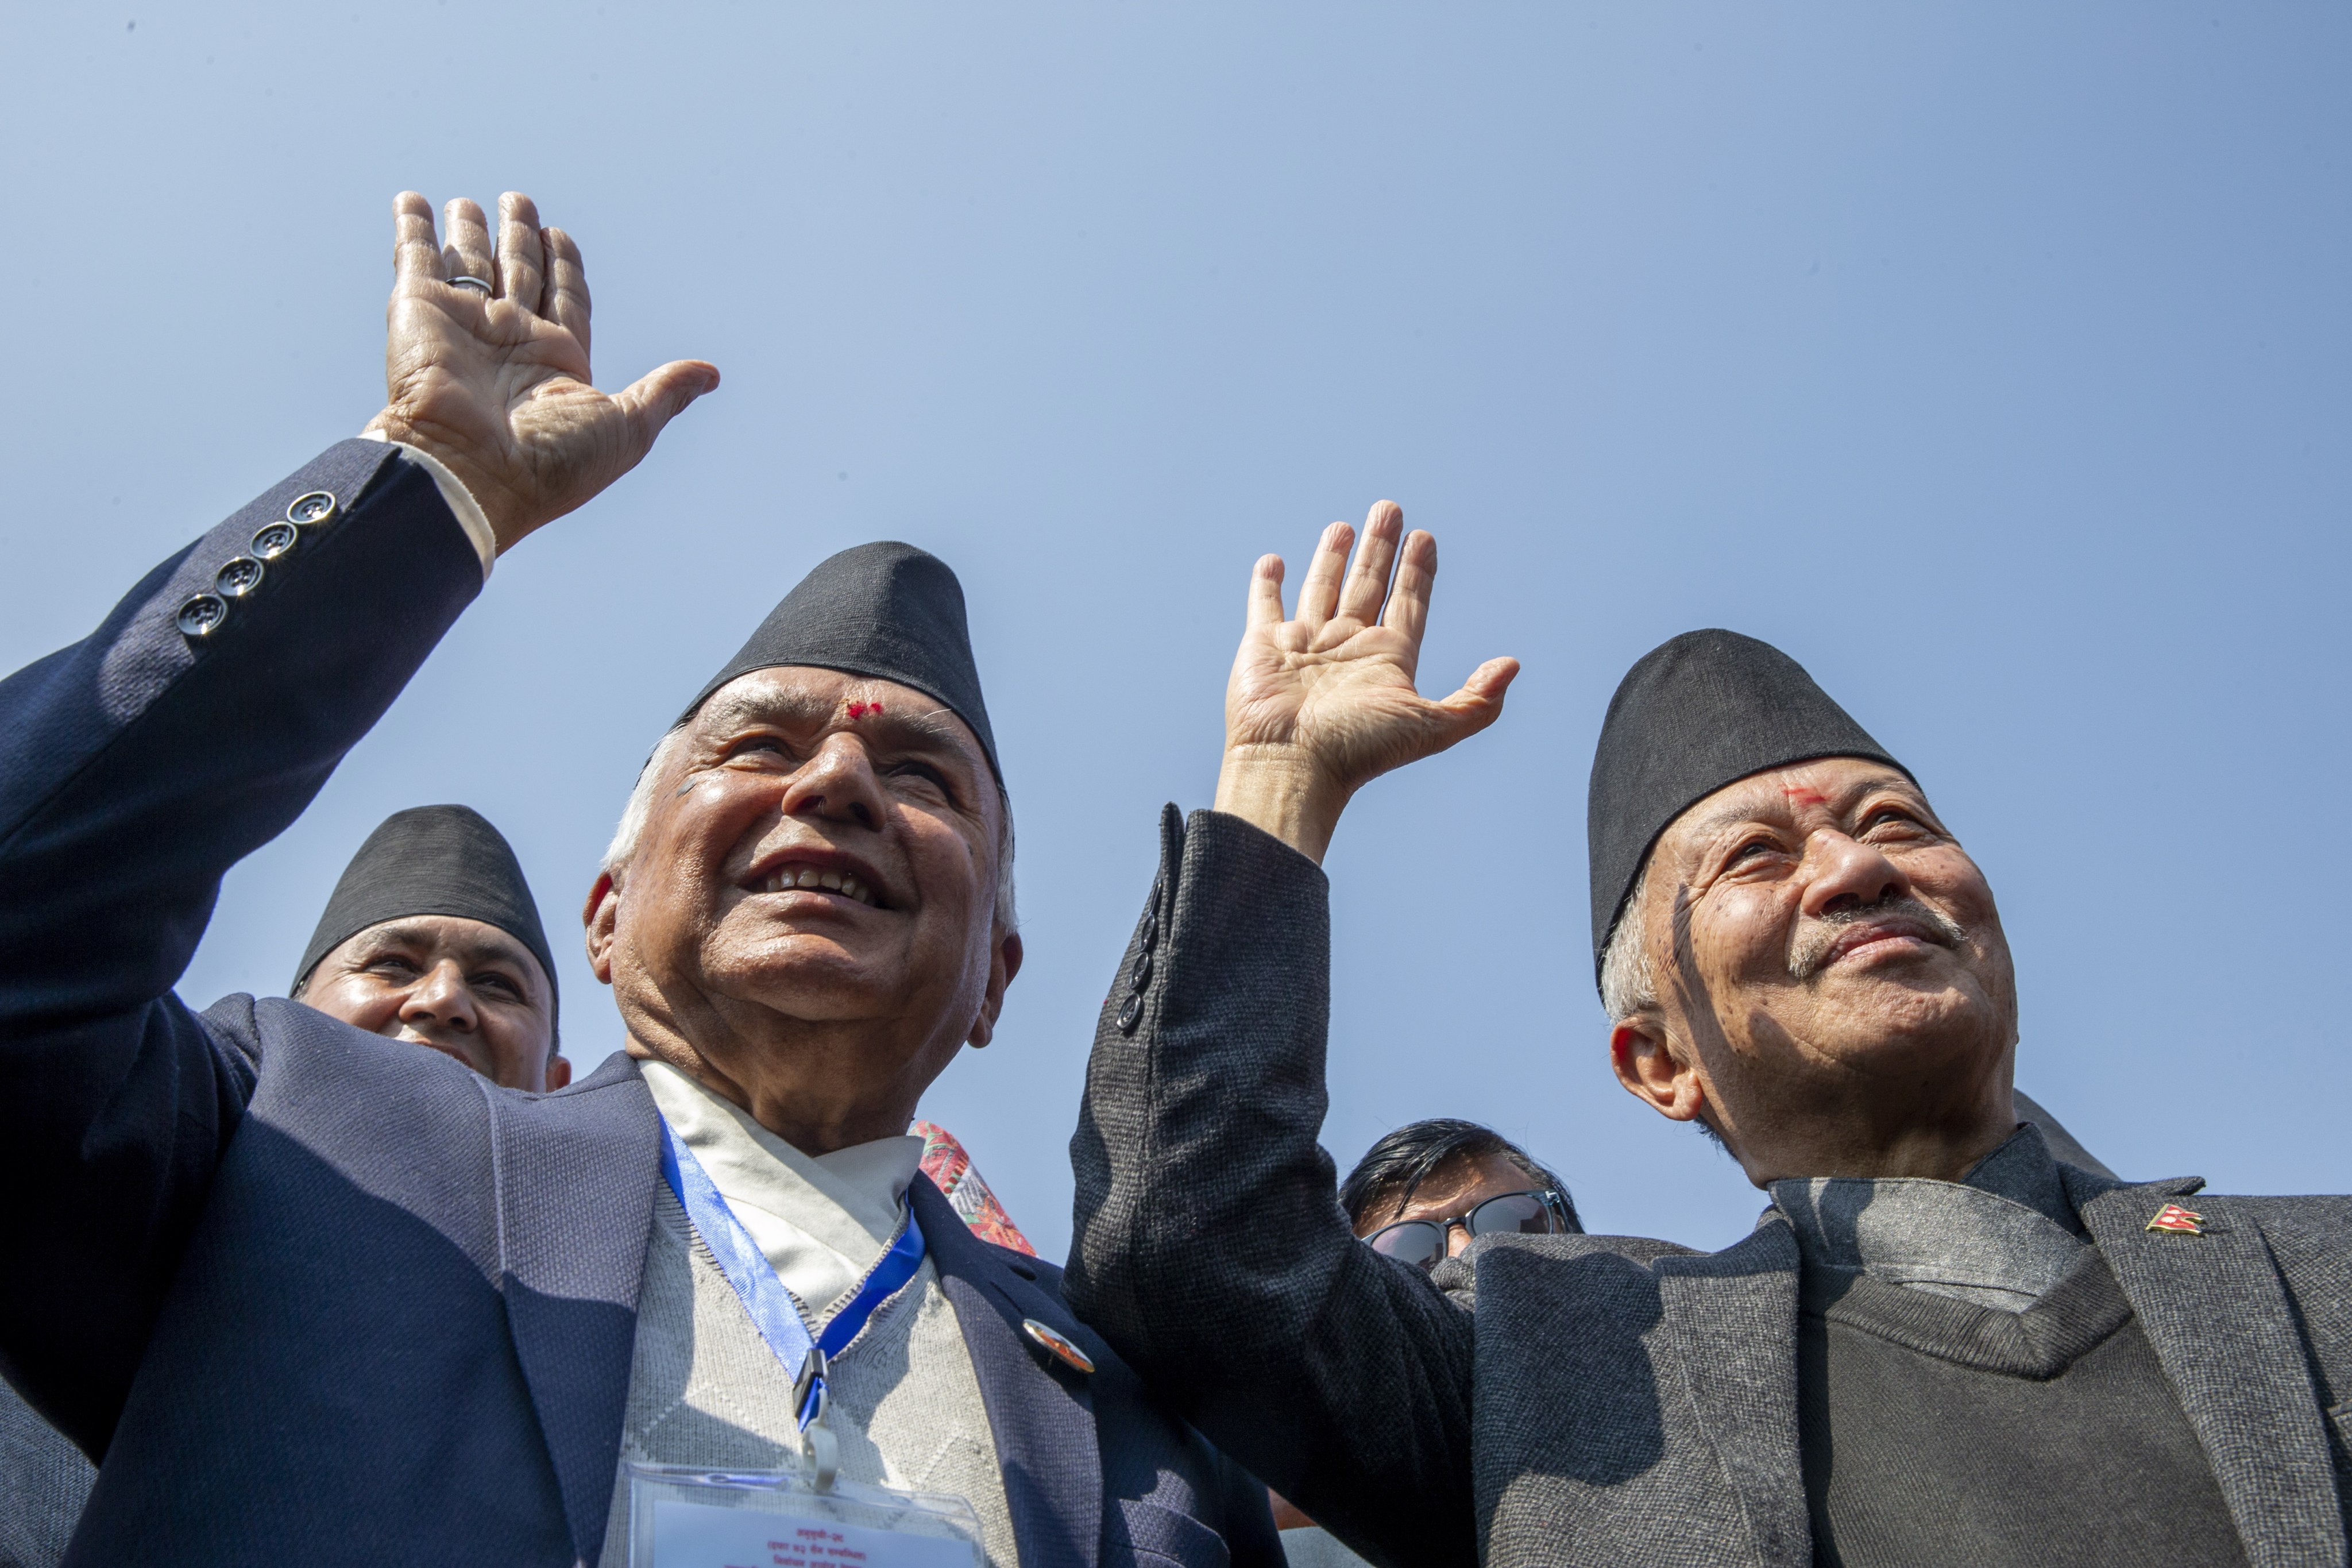 Presidential candidates Ram Chandra Poudel, left, from the Nepali Congress Party and Subas Nembang, leader of the Communist Party of Nepal. Photo: EPA-EFE